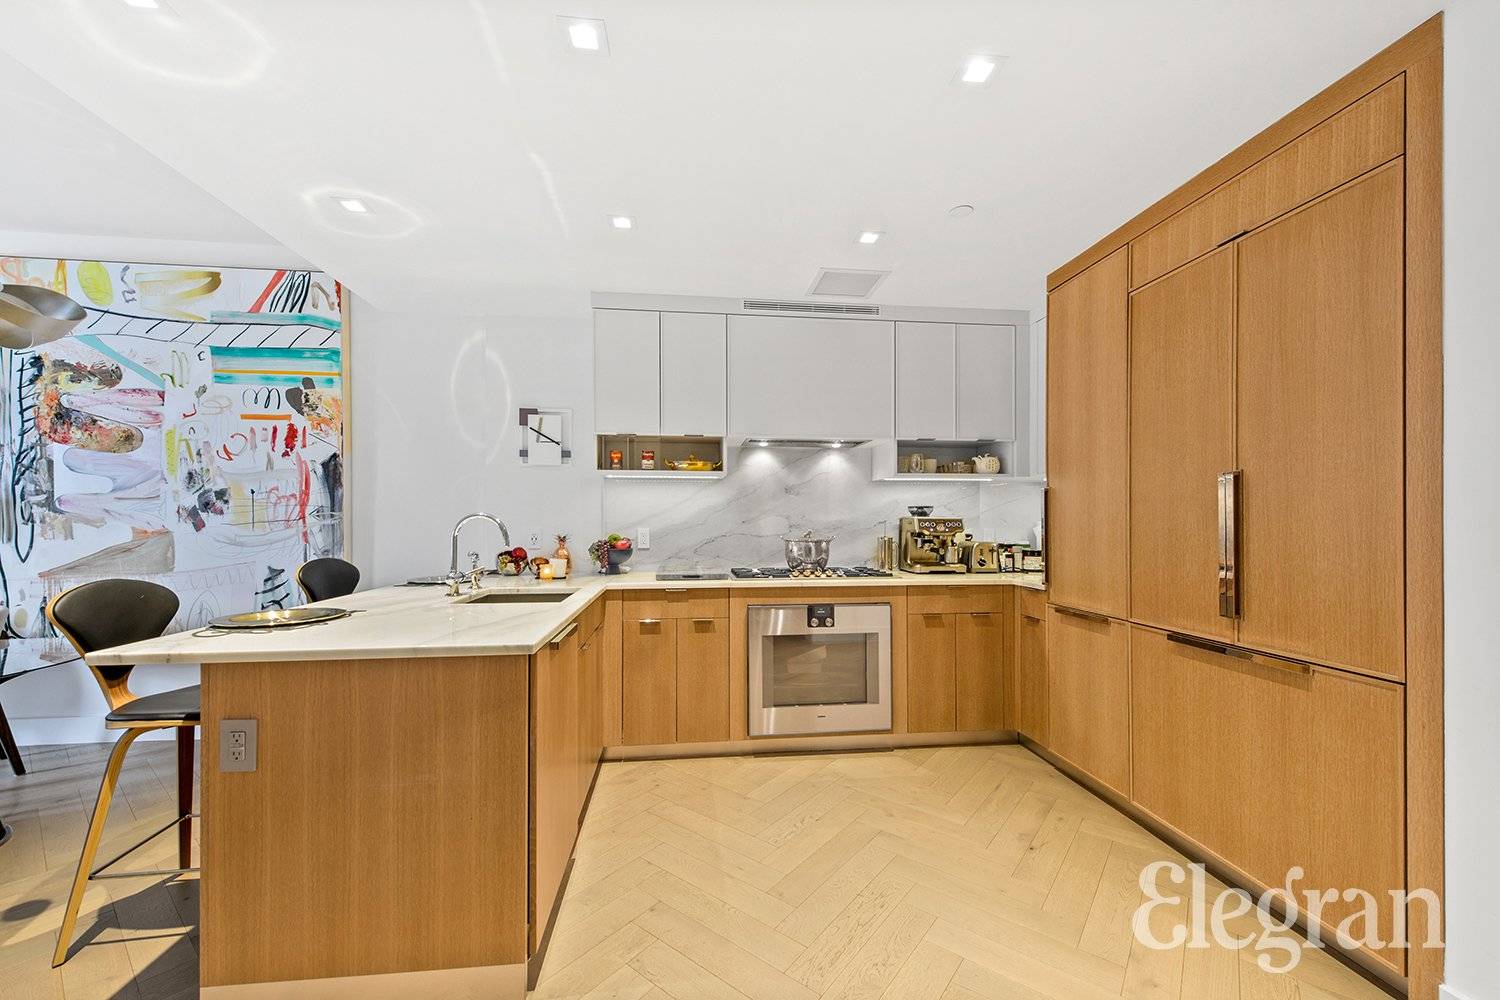 This is your chance to secure a stylish and spacious condo within The Cobble Hill House on the peaceful and prized Amity Street.